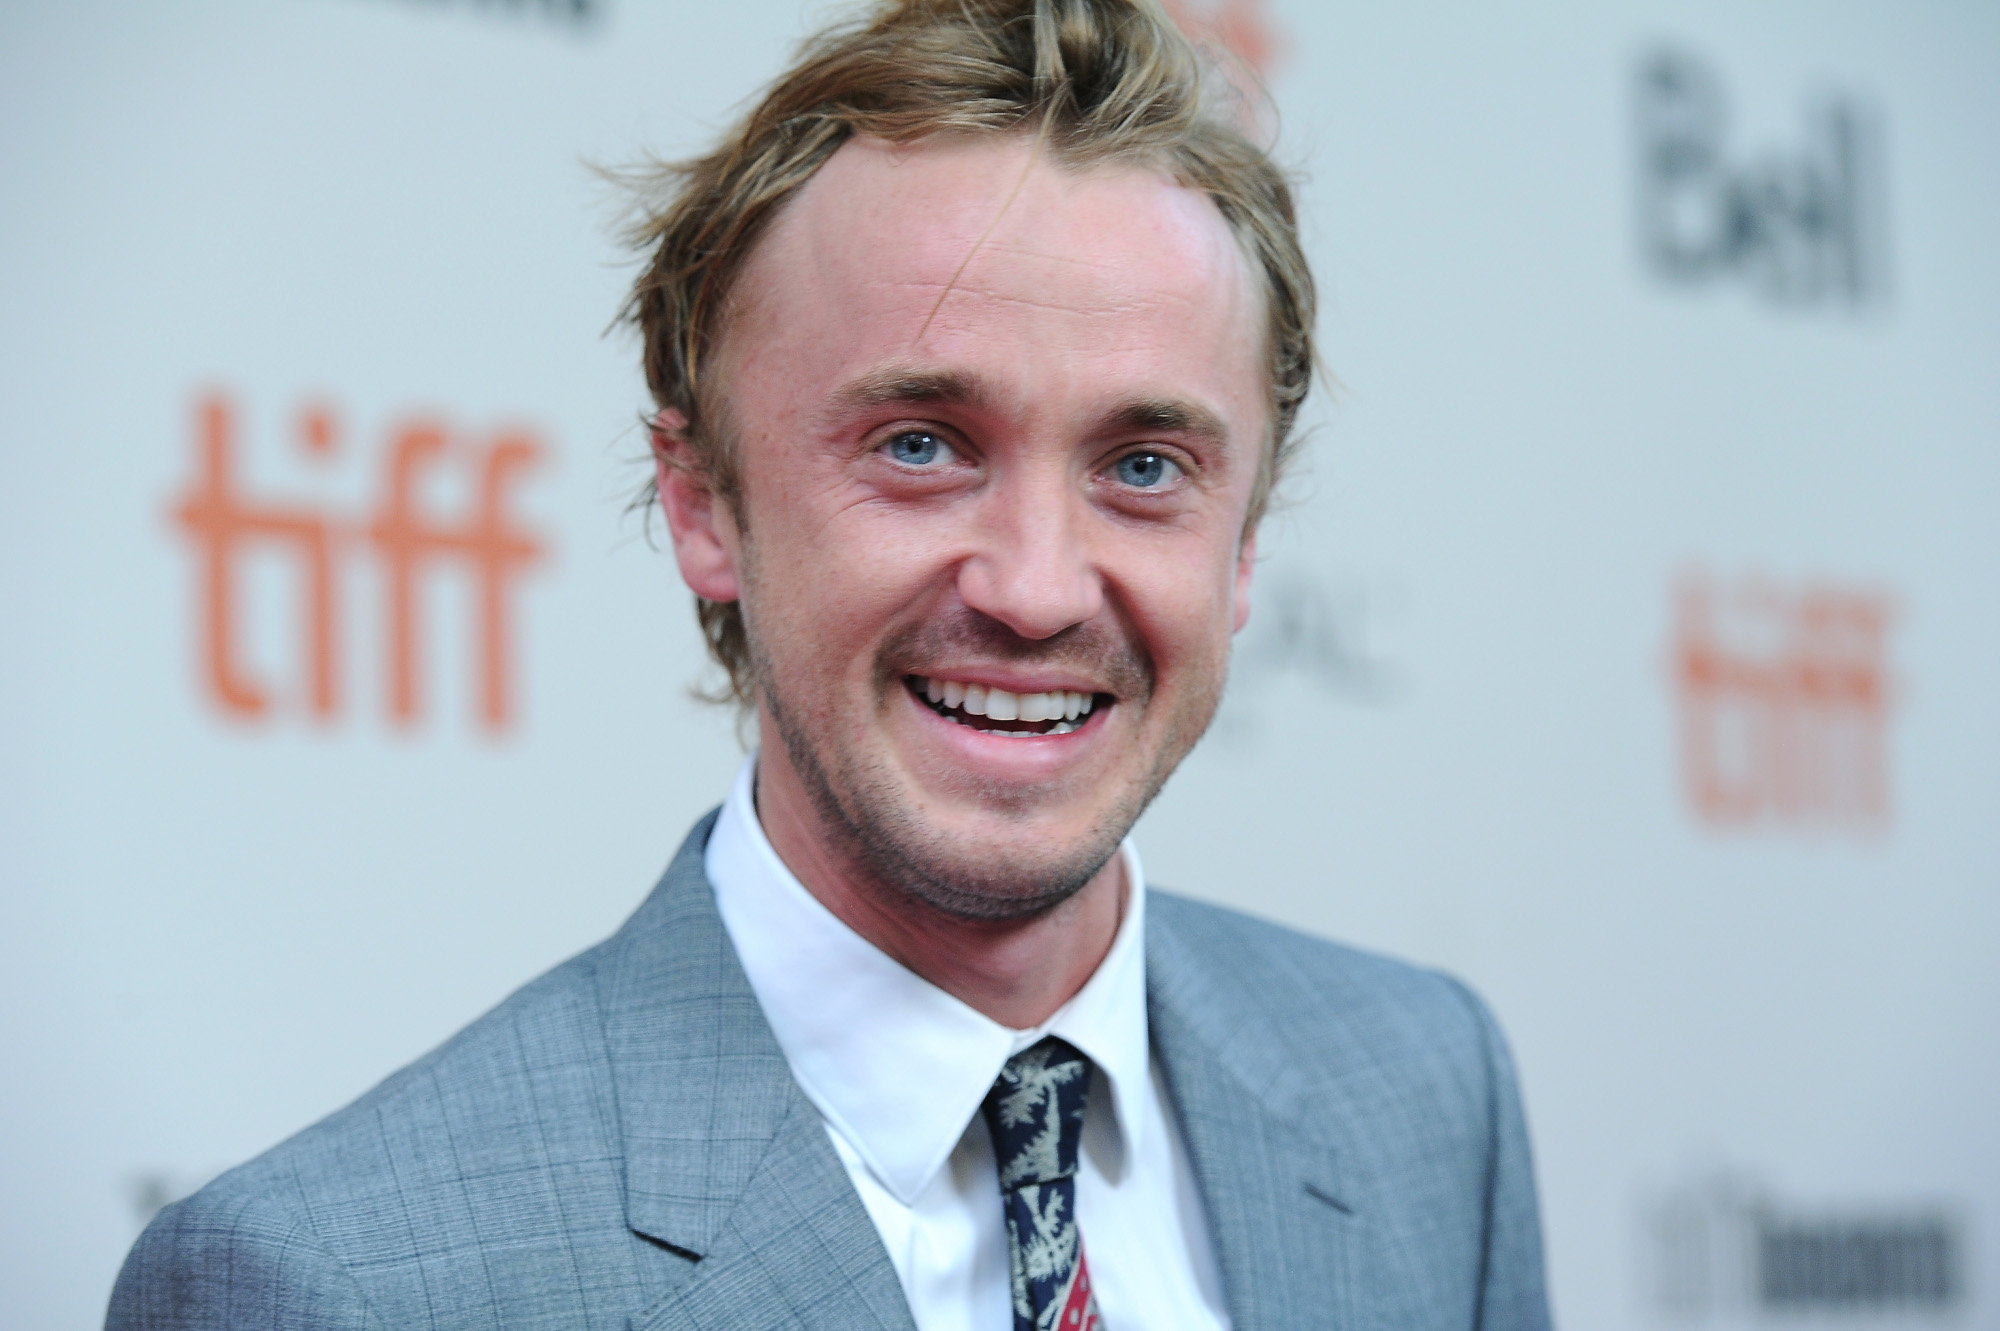 'Harry Potter' star Tom Felton wearing a gray suit and smiling. Tom Felton's net worth in 2022 is estimated at $20 million.